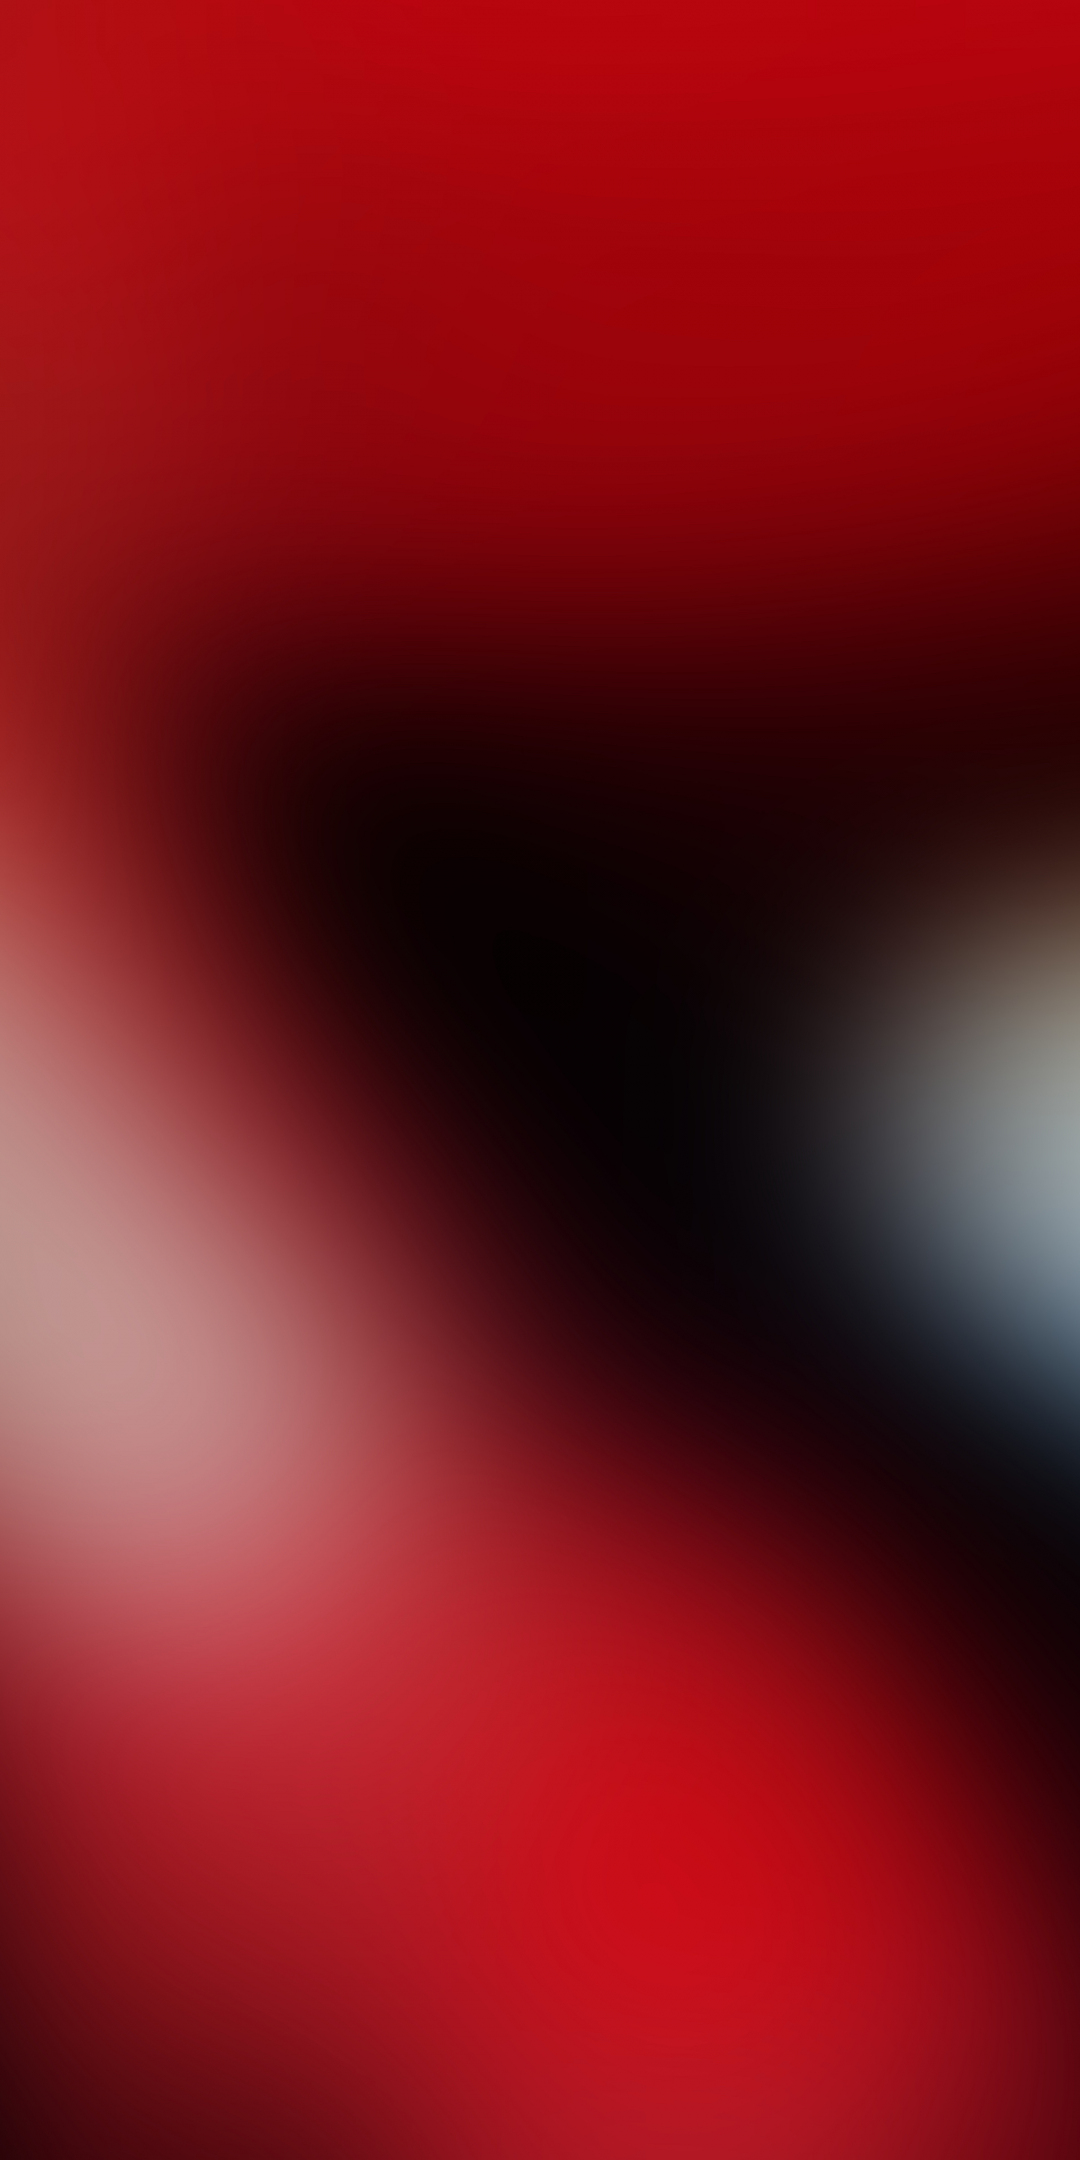 Red-black, gradient, glow, abstract, 1080x2160 wallpaper